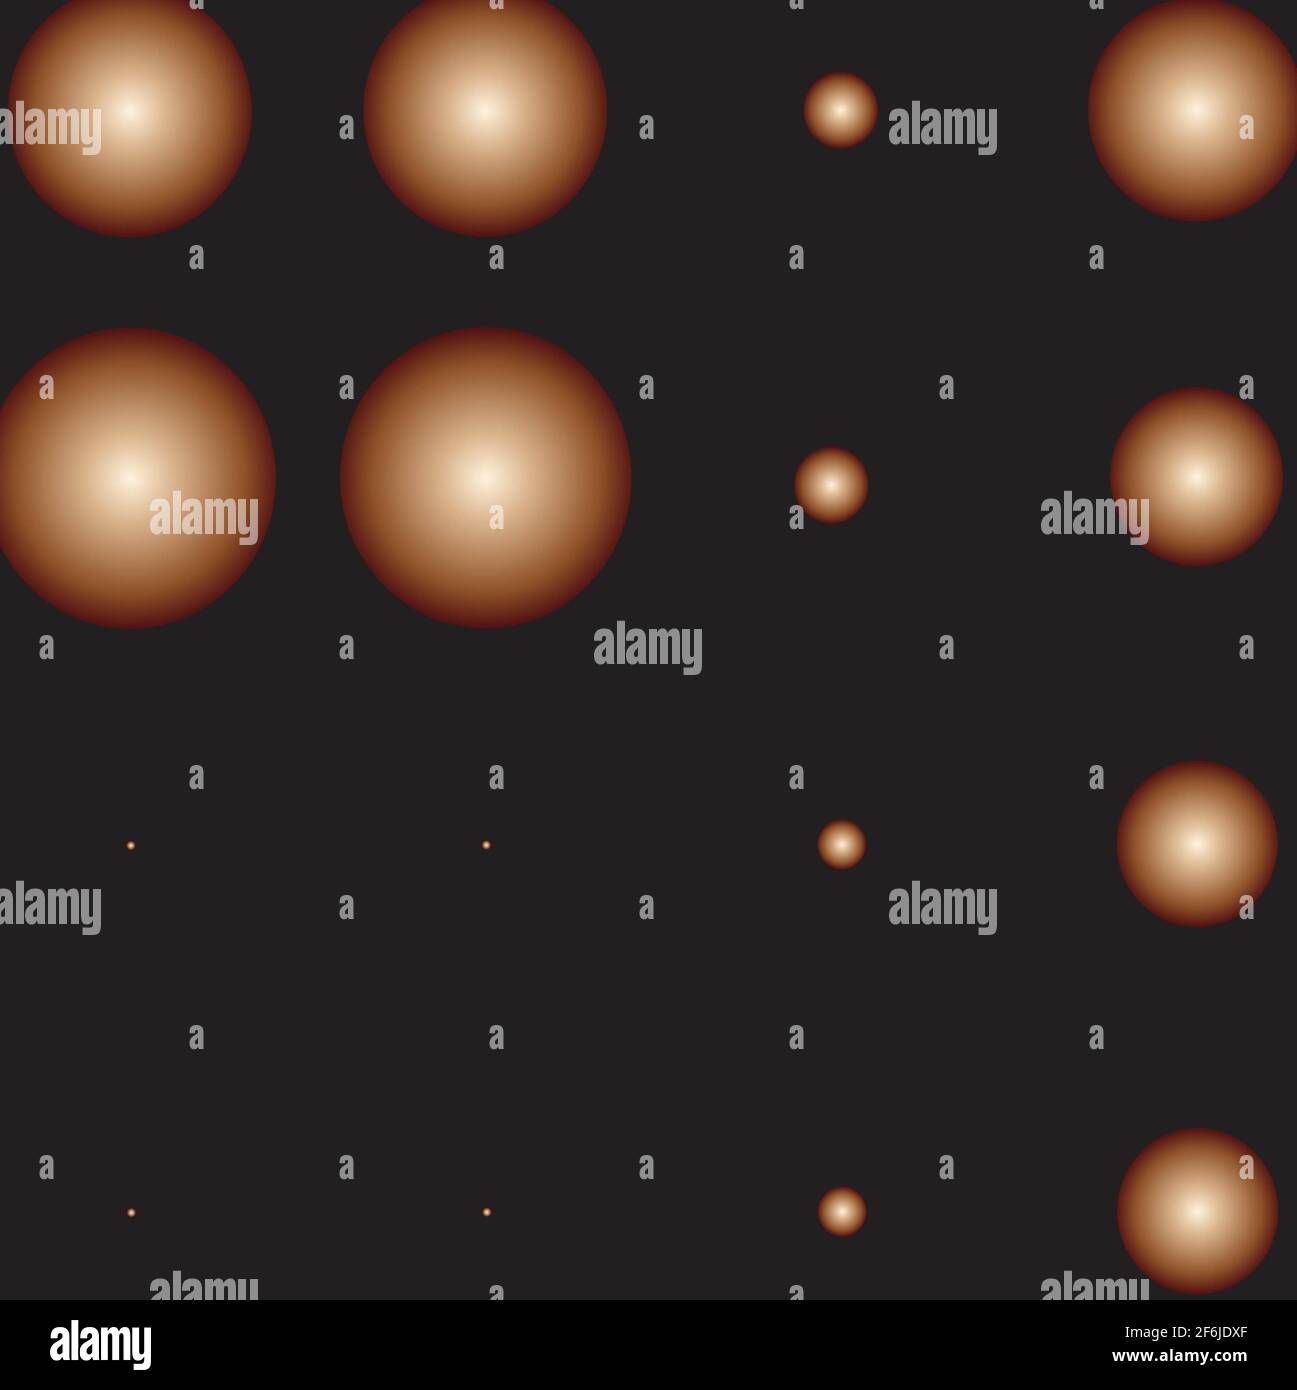 spheres of different sizes on black background Stock Photo